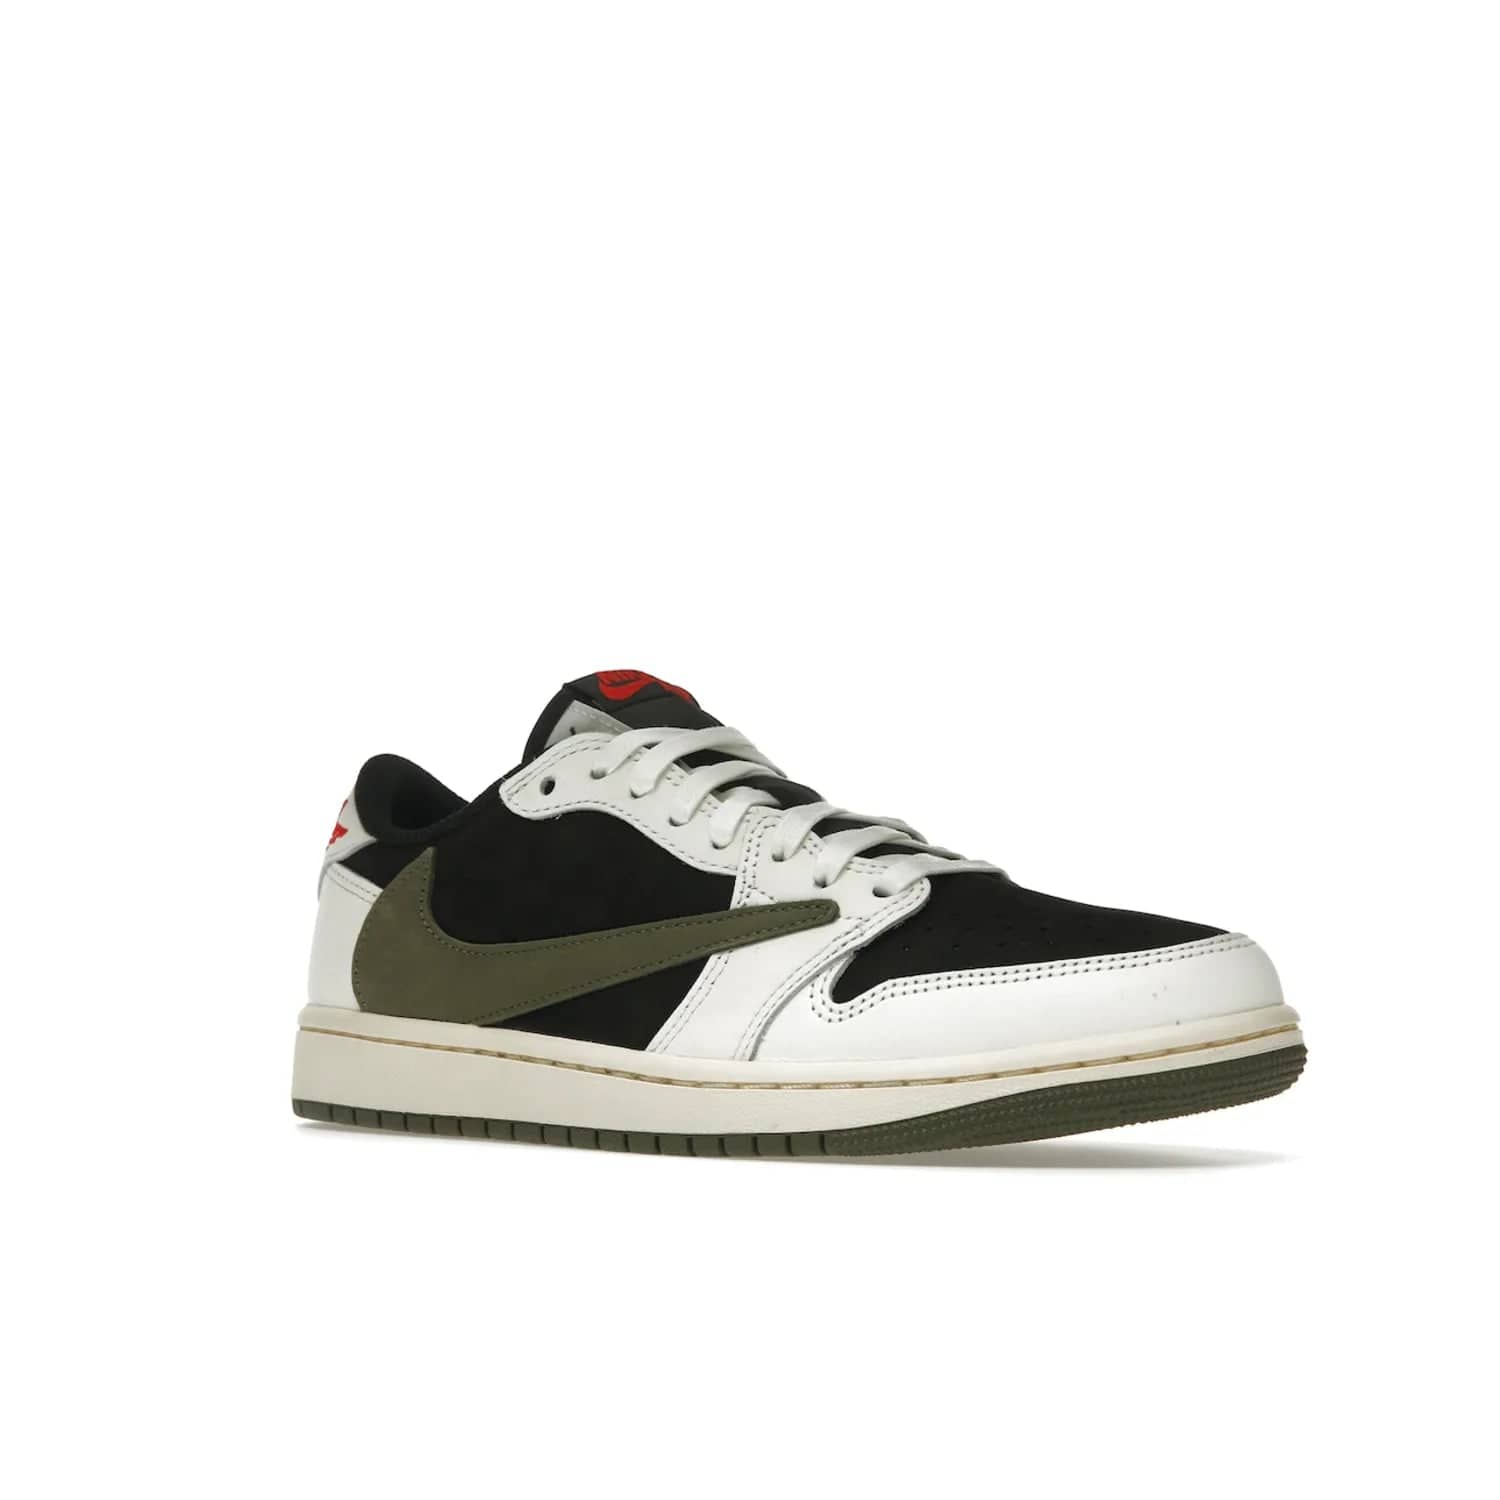 Jordan 1 Retro Low OG SP Travis Scott Olive (Women's) - Image 5 - Only at www.BallersClubKickz.com - Score style points with the Air Jordan 1 Retro Low OG SP Travis Scott Olive exclusively in womens sizing. White leather and black nubuck uppers, plus signature reverse style Nike Swoosh and aged midsole atop olive green outsole. Stand out with these stylish and eye-catching sneakers, dropping April 26, 2023.